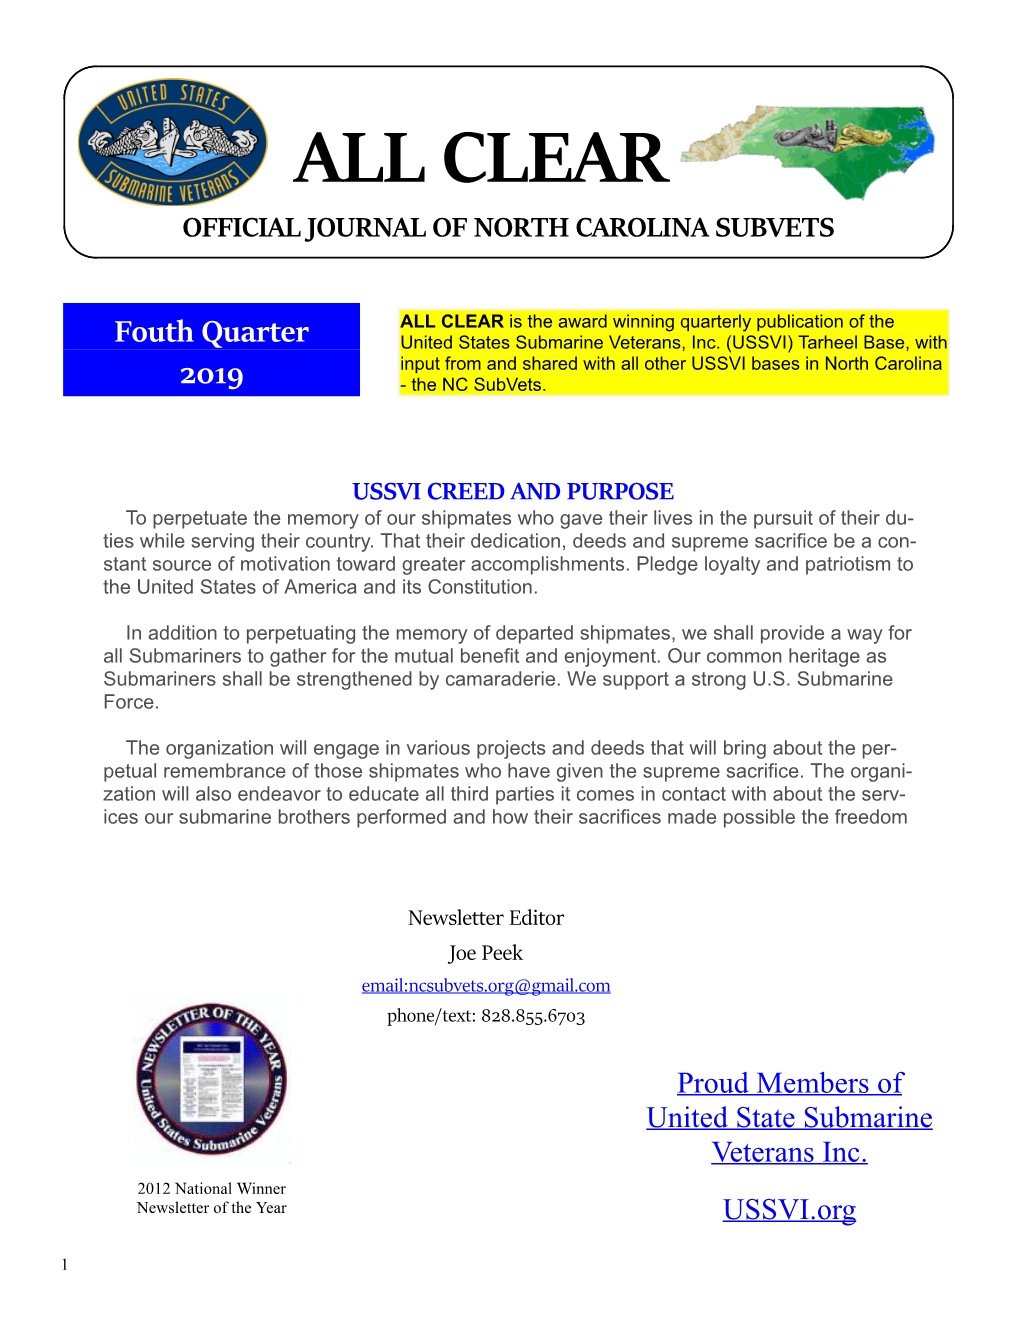 All Clear Official Journal of North Carolina Subvets